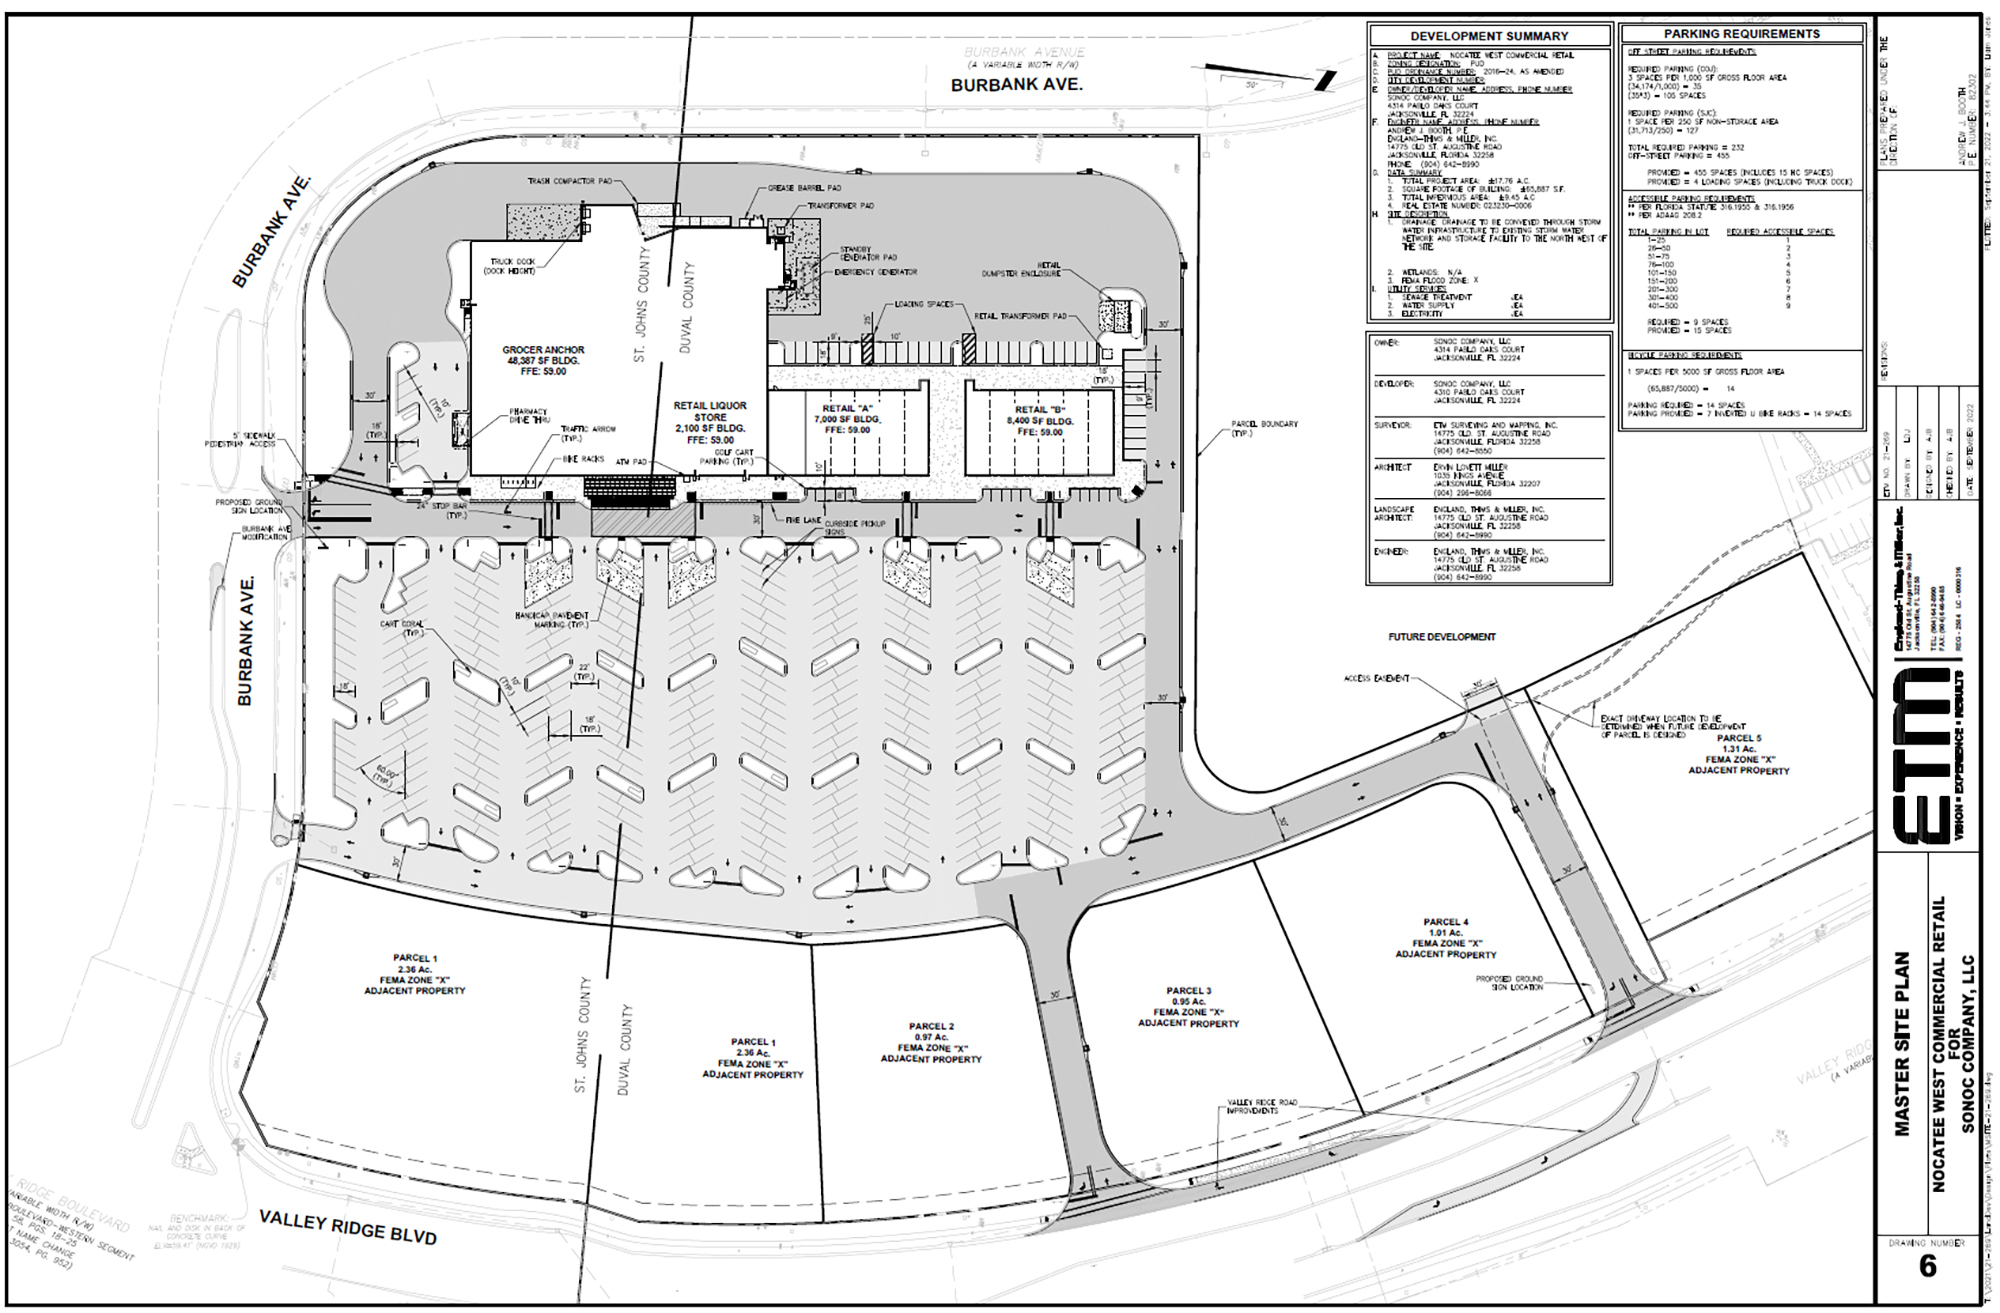 The county line runs through the planned Nocatee West retail shopping center.